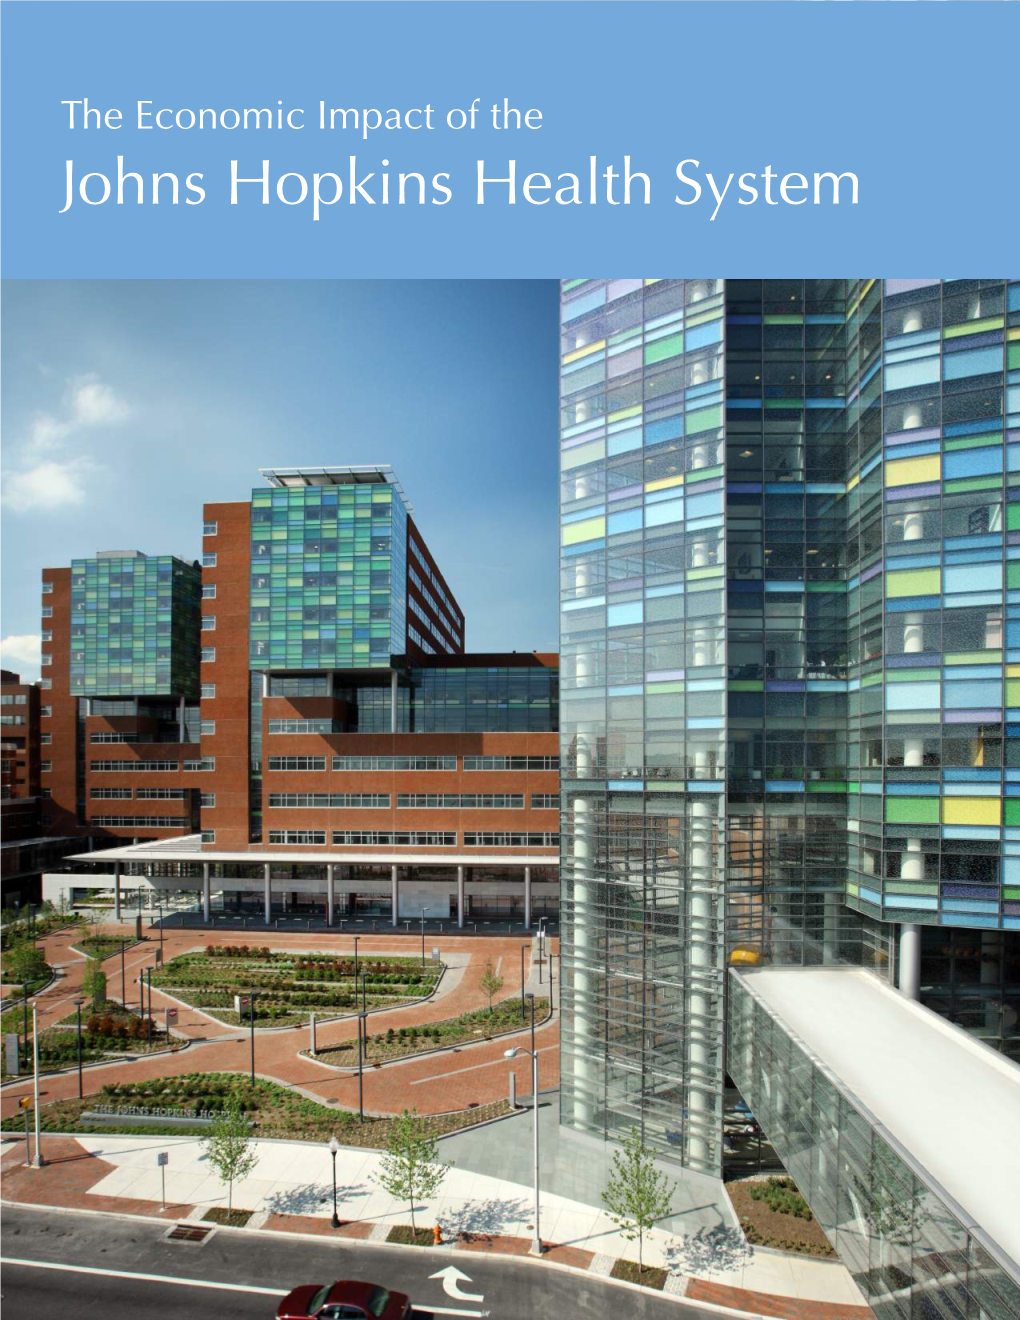 The Economic Impact of the Johns Hopkins Health System COVER: the Johns Hopkins Hospital